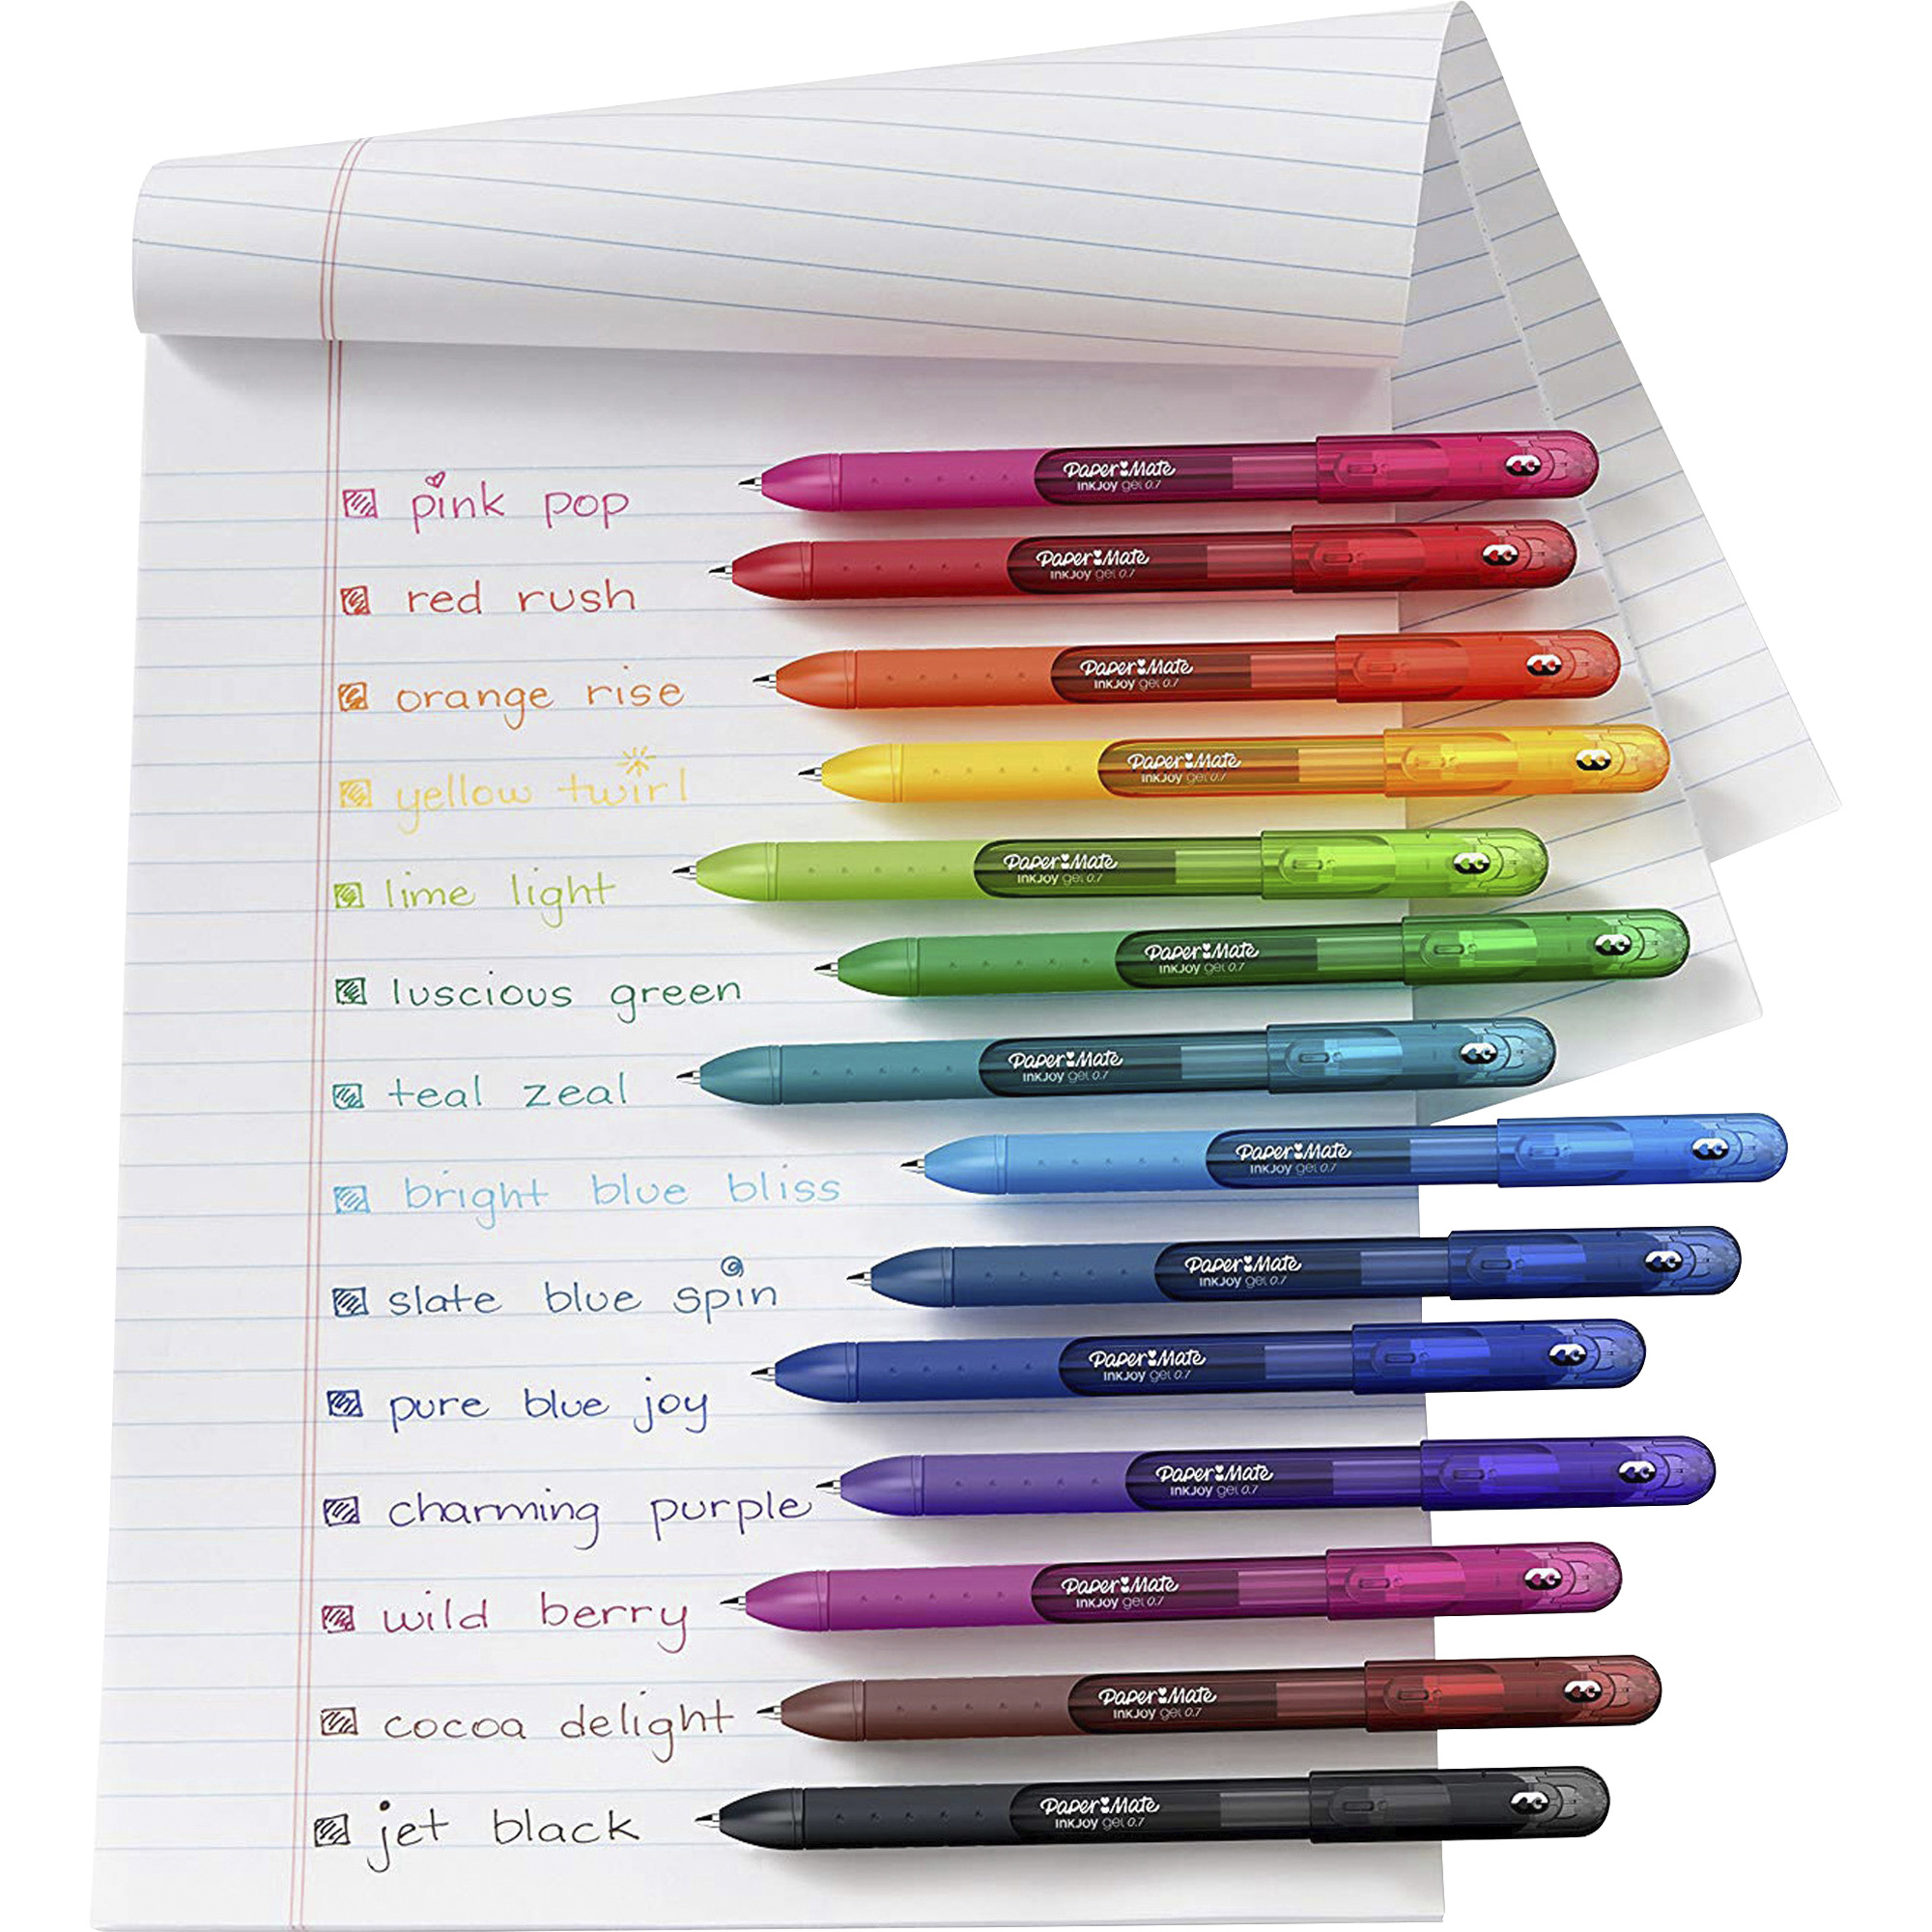 Paper Mate InkJoy Retractable Gel Pens, Fine Point, Assorted Ink